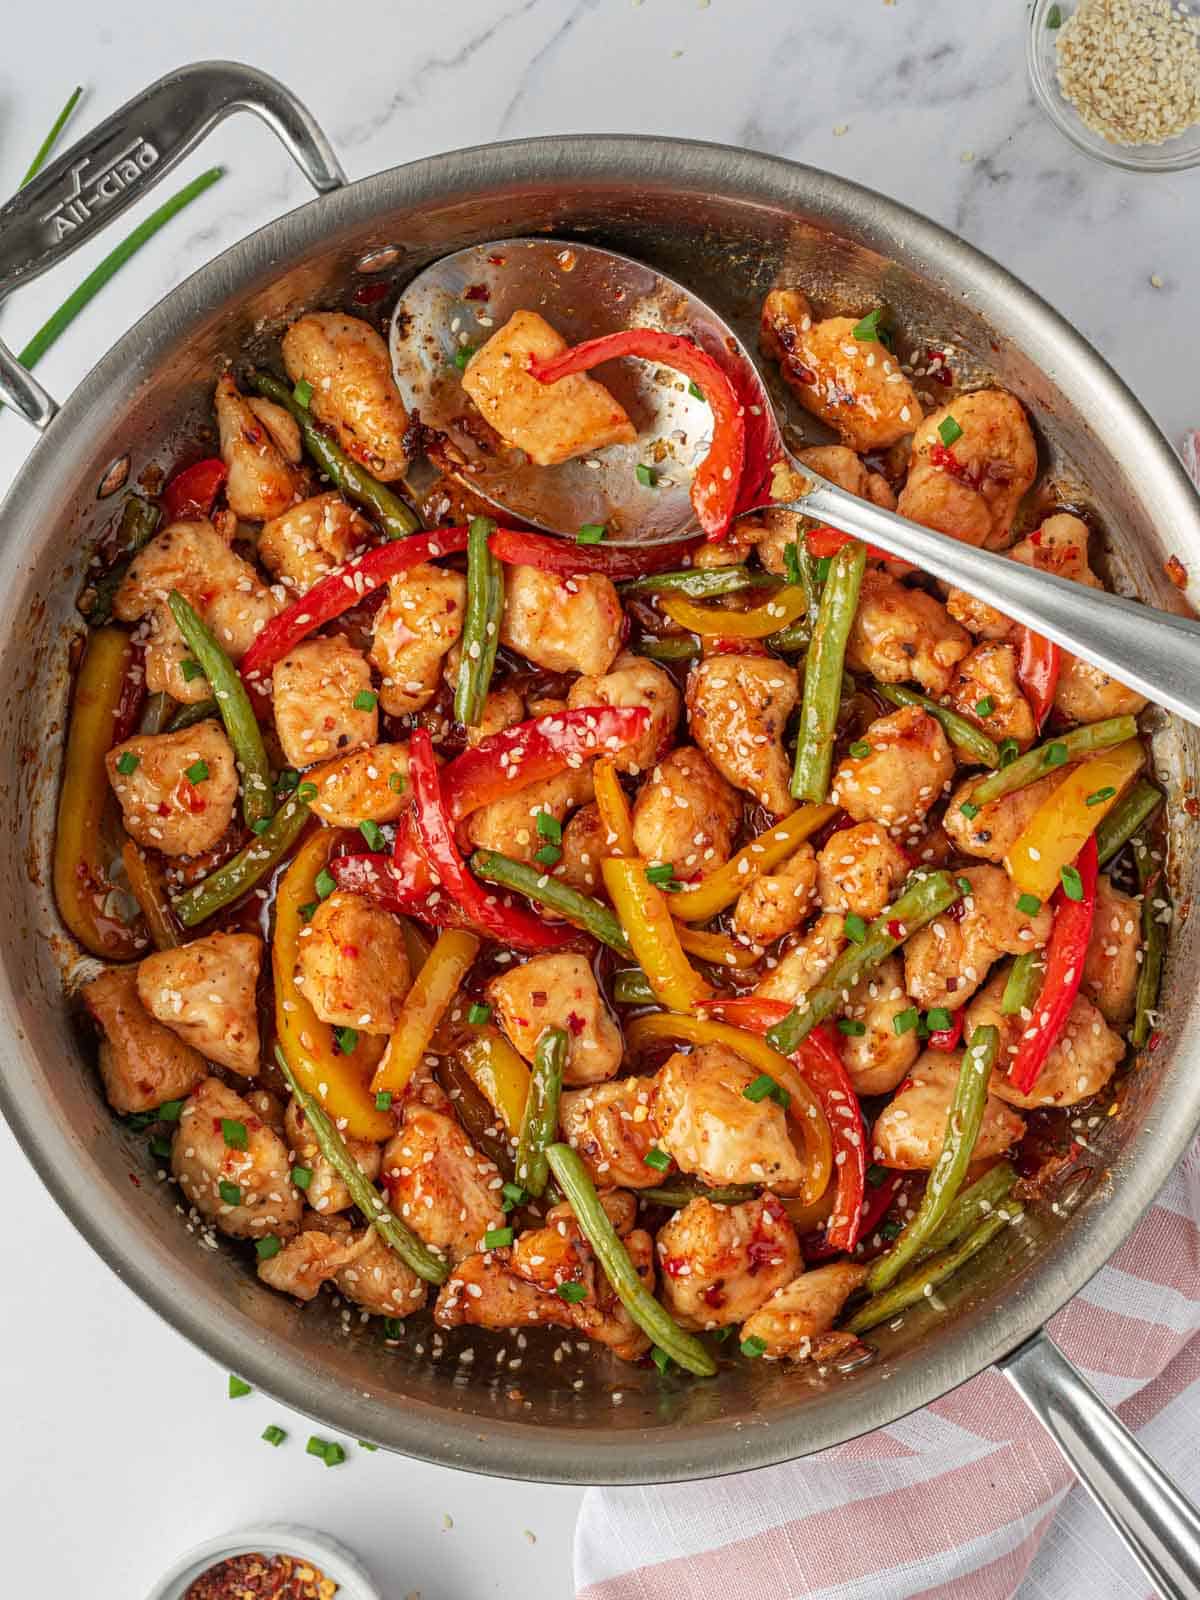 Crispy chicken stir fry in a skillet with a spoon for serving.